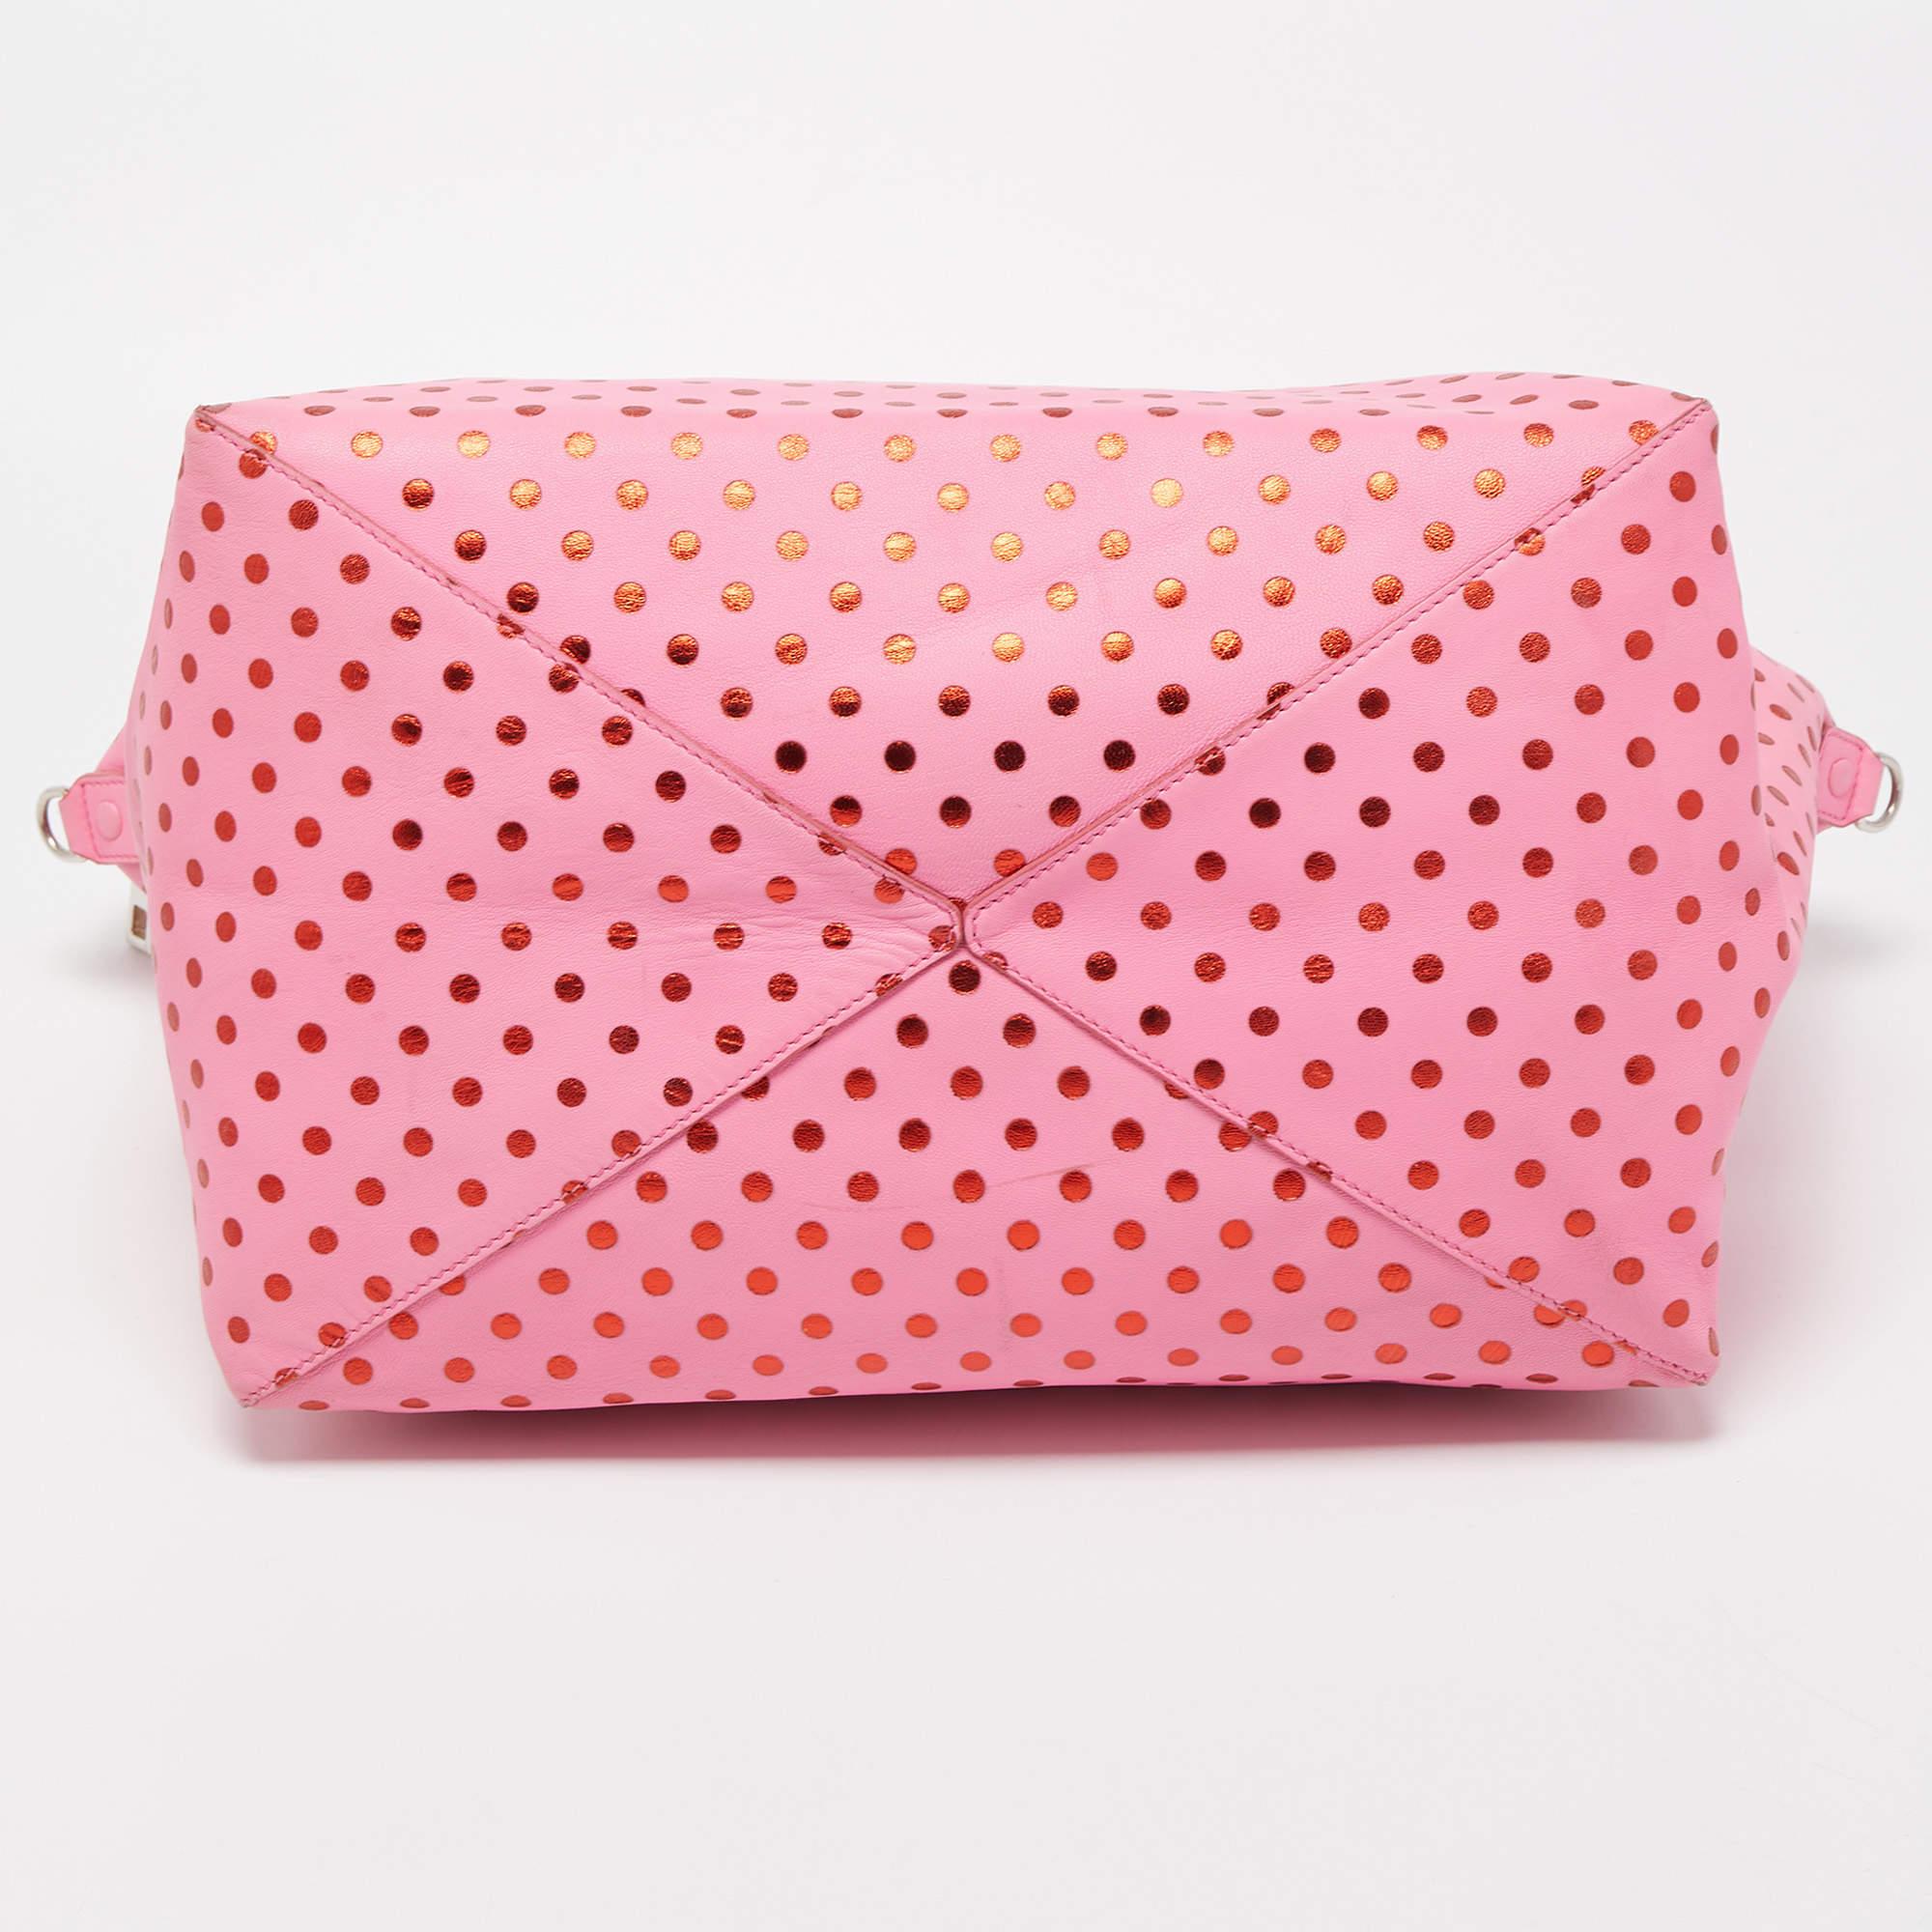 Marc Jacobs Pink Leather Polka Dot Zip Tote For Sale 1